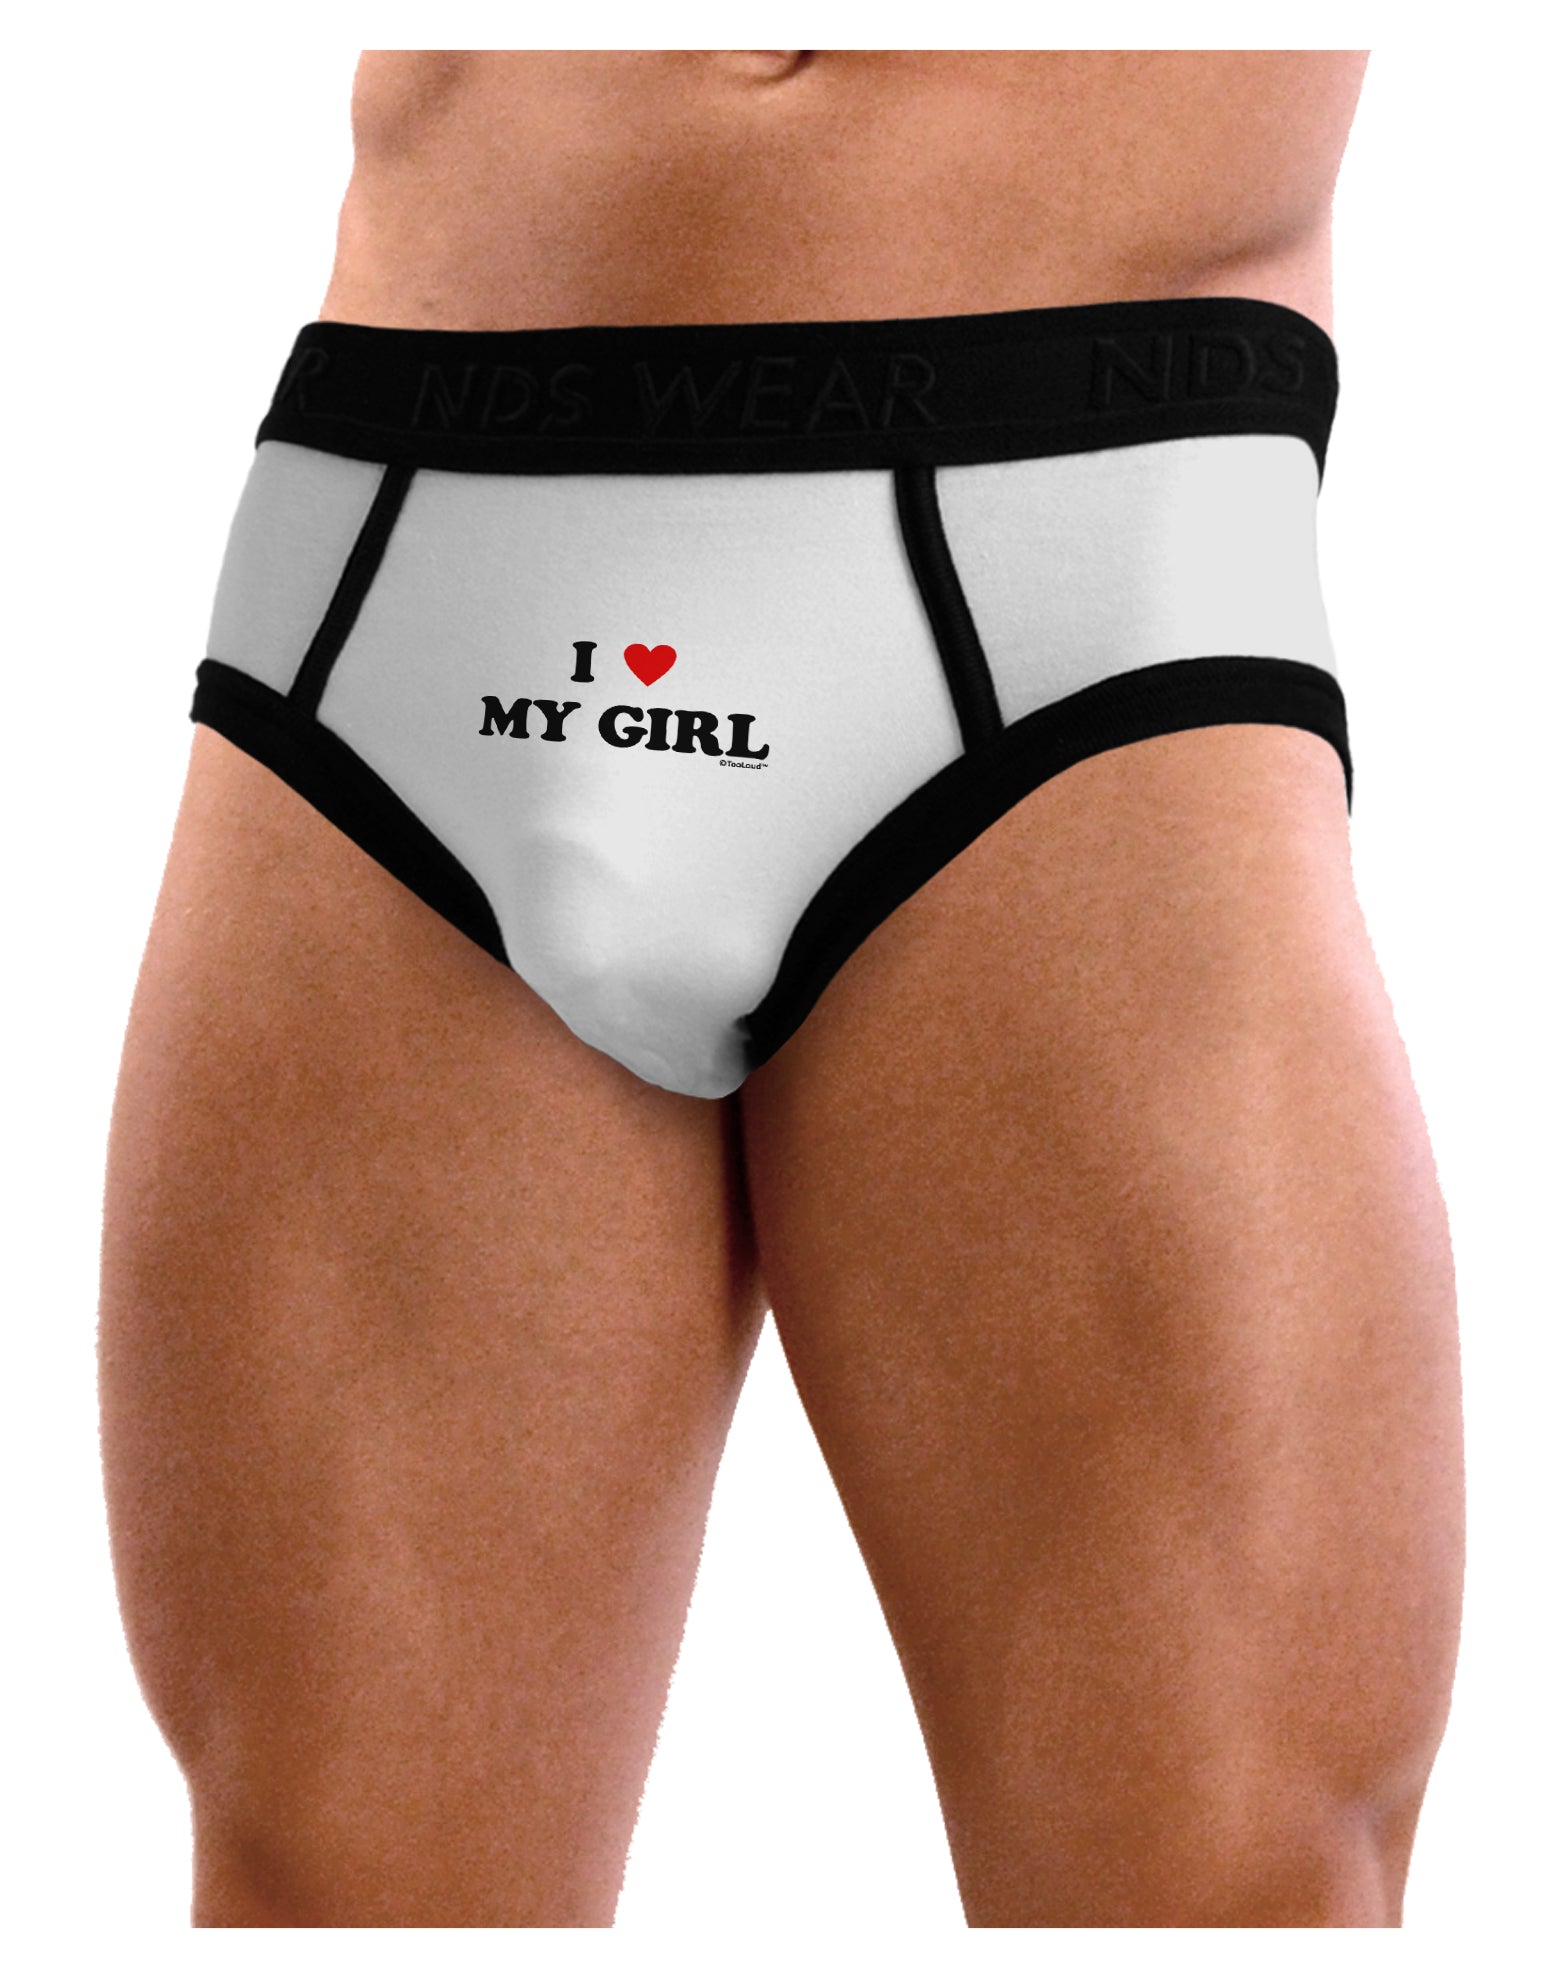 I Heart My Girl - Matching Couples Design Boxer Briefs by TooLoud